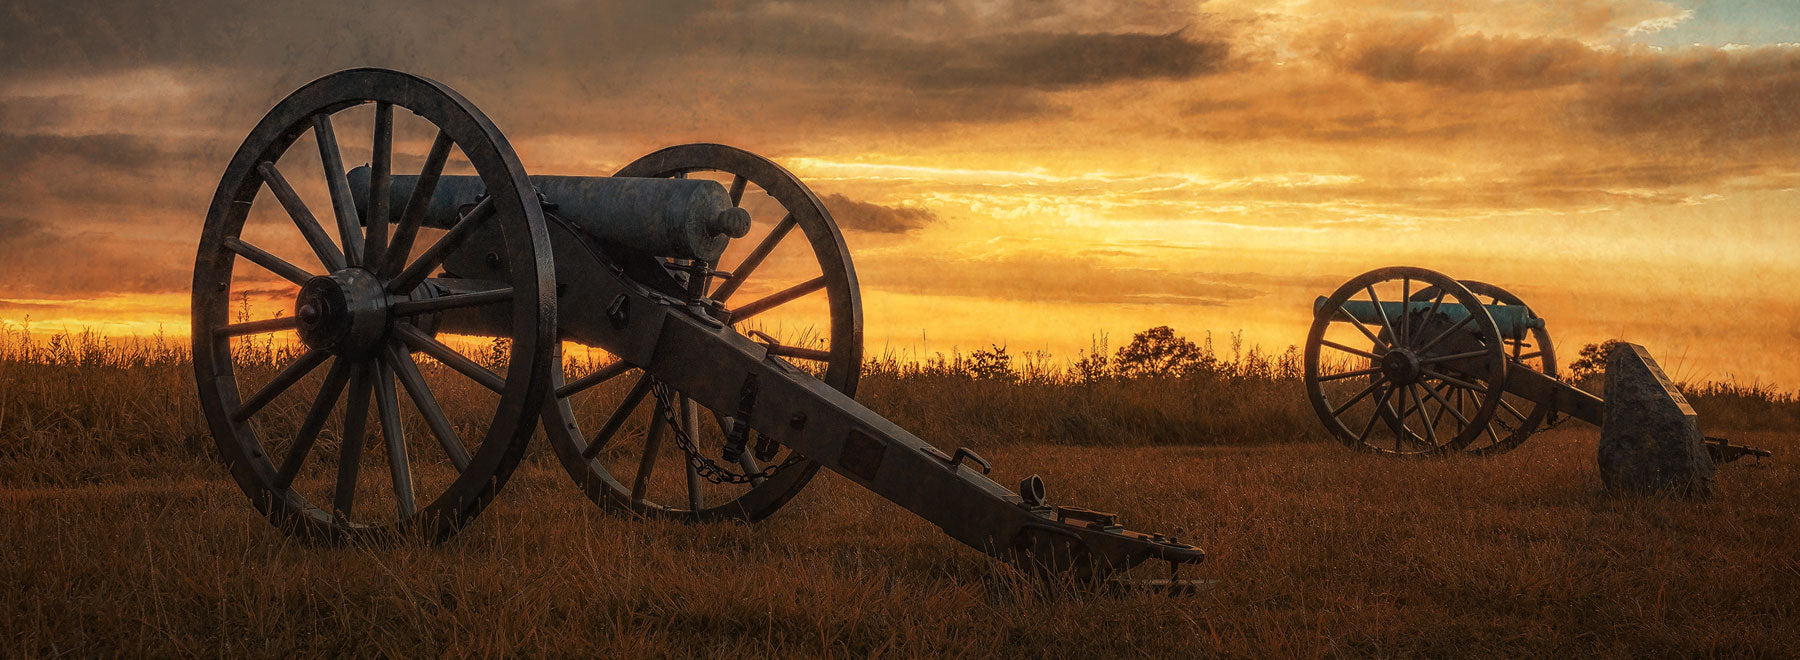 Gettysburg cannons at sunset.